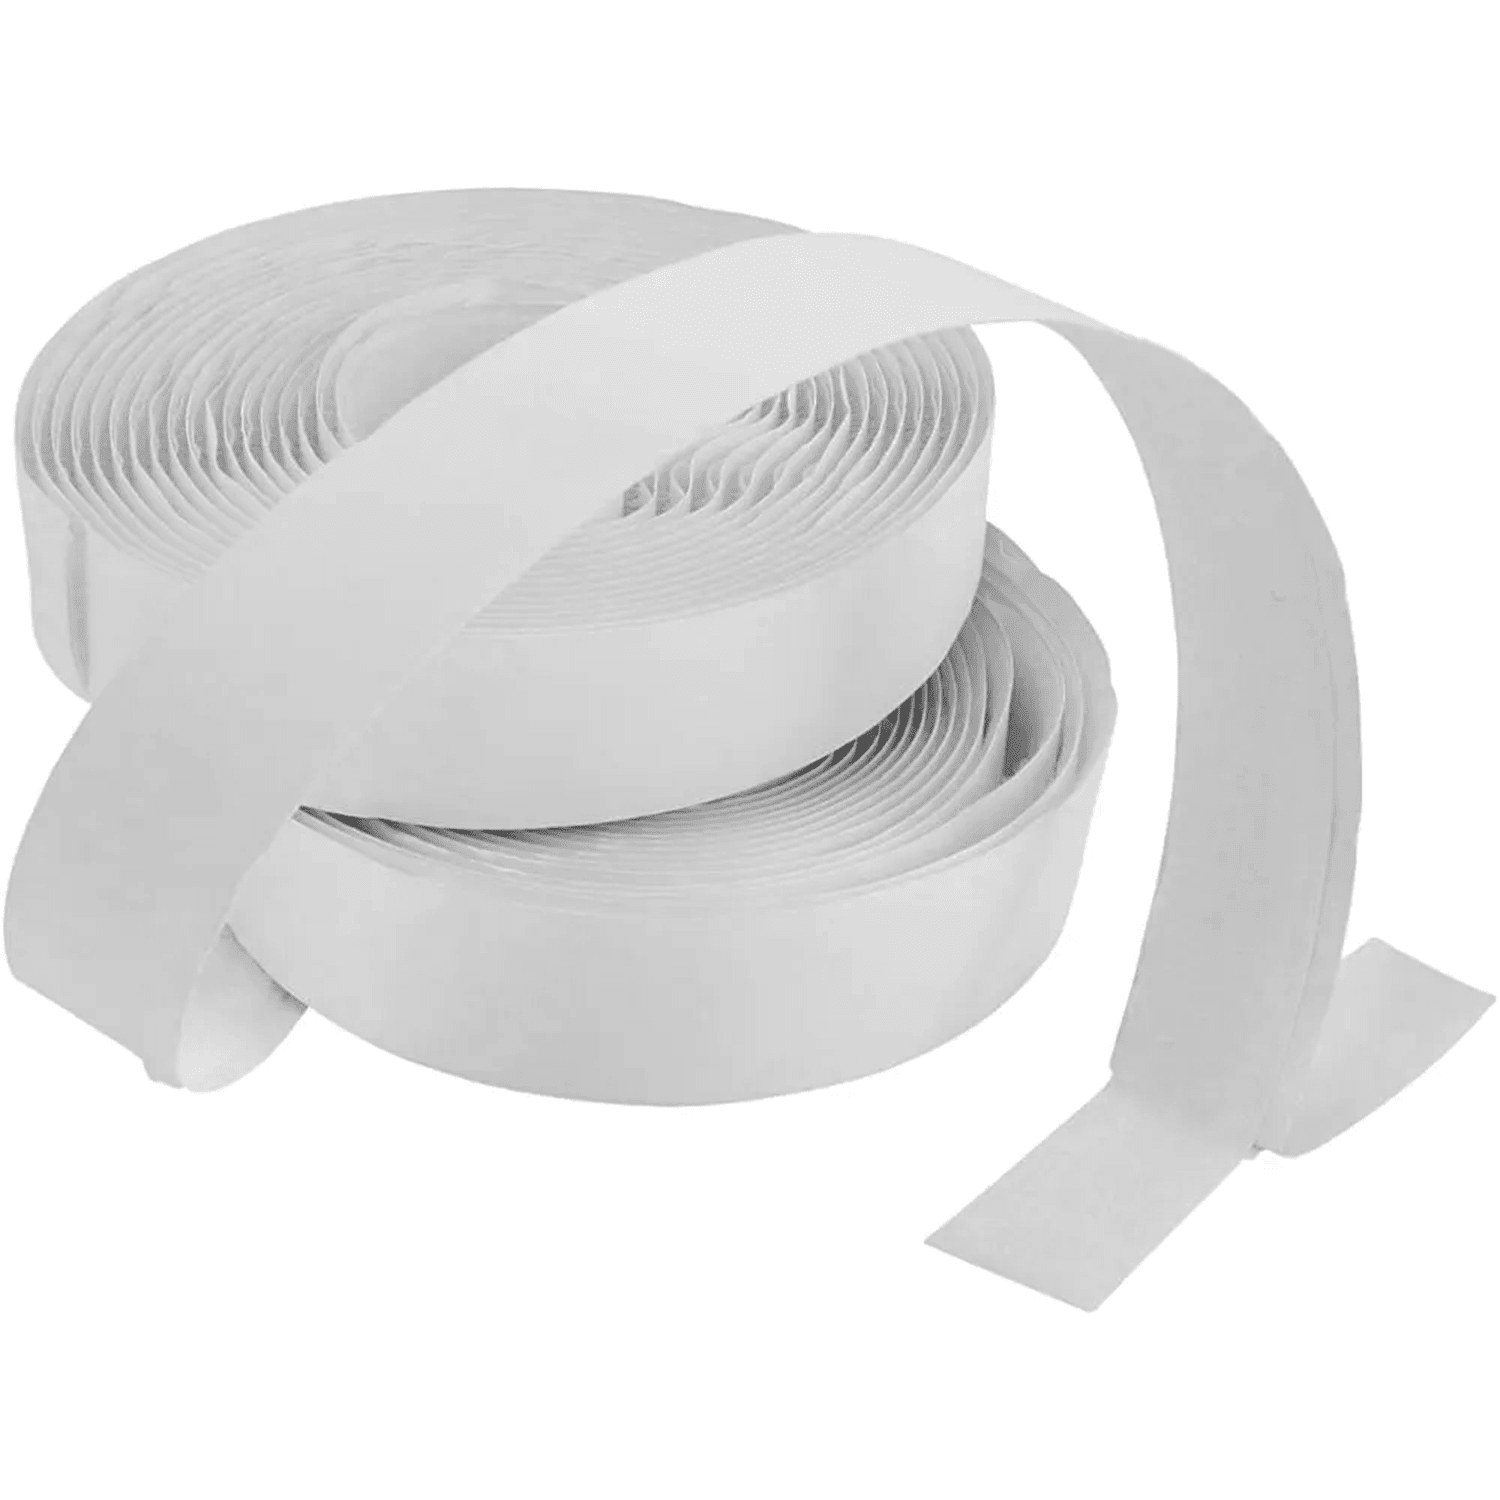 China Hook And Loop Velcro Fastener, Hook And Loop Velcro Fastener